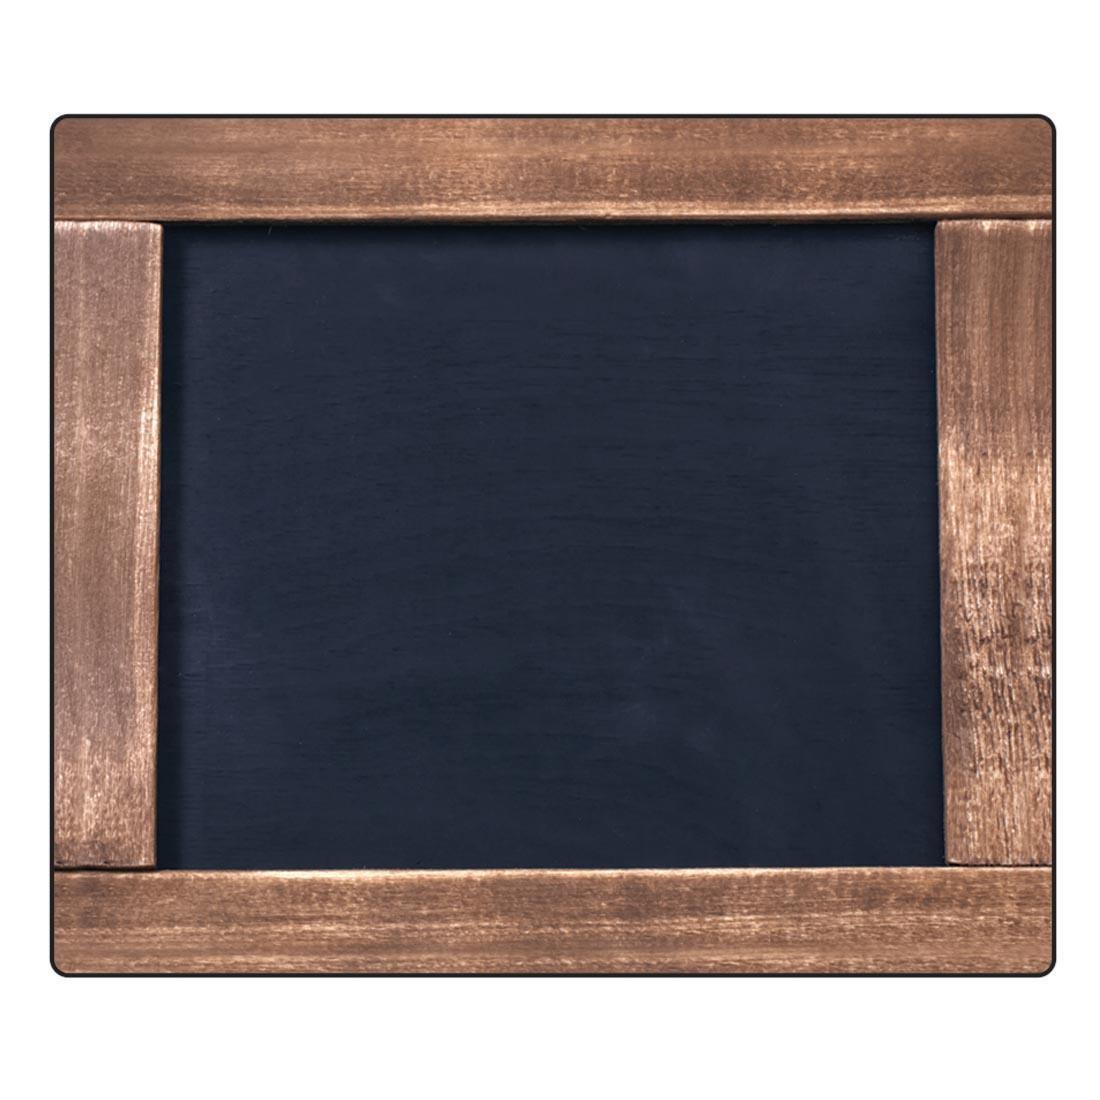 Chalkboard Mini Cut-Out from the Industrial Chic collection by Carson Dellosa